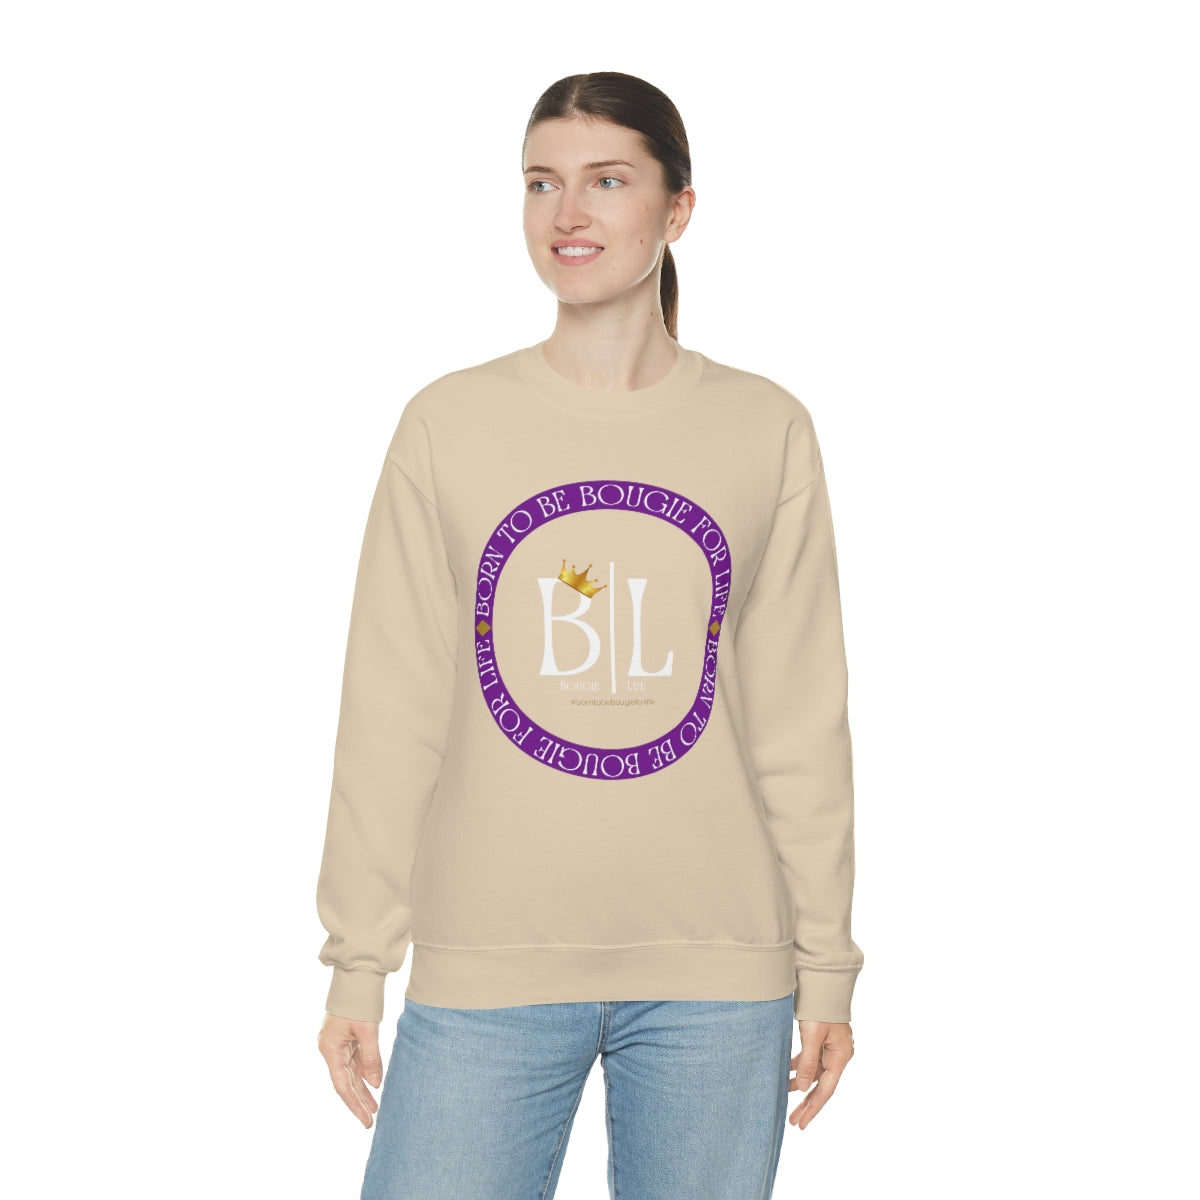 Born to Be Bougie for Life Sweatshirt